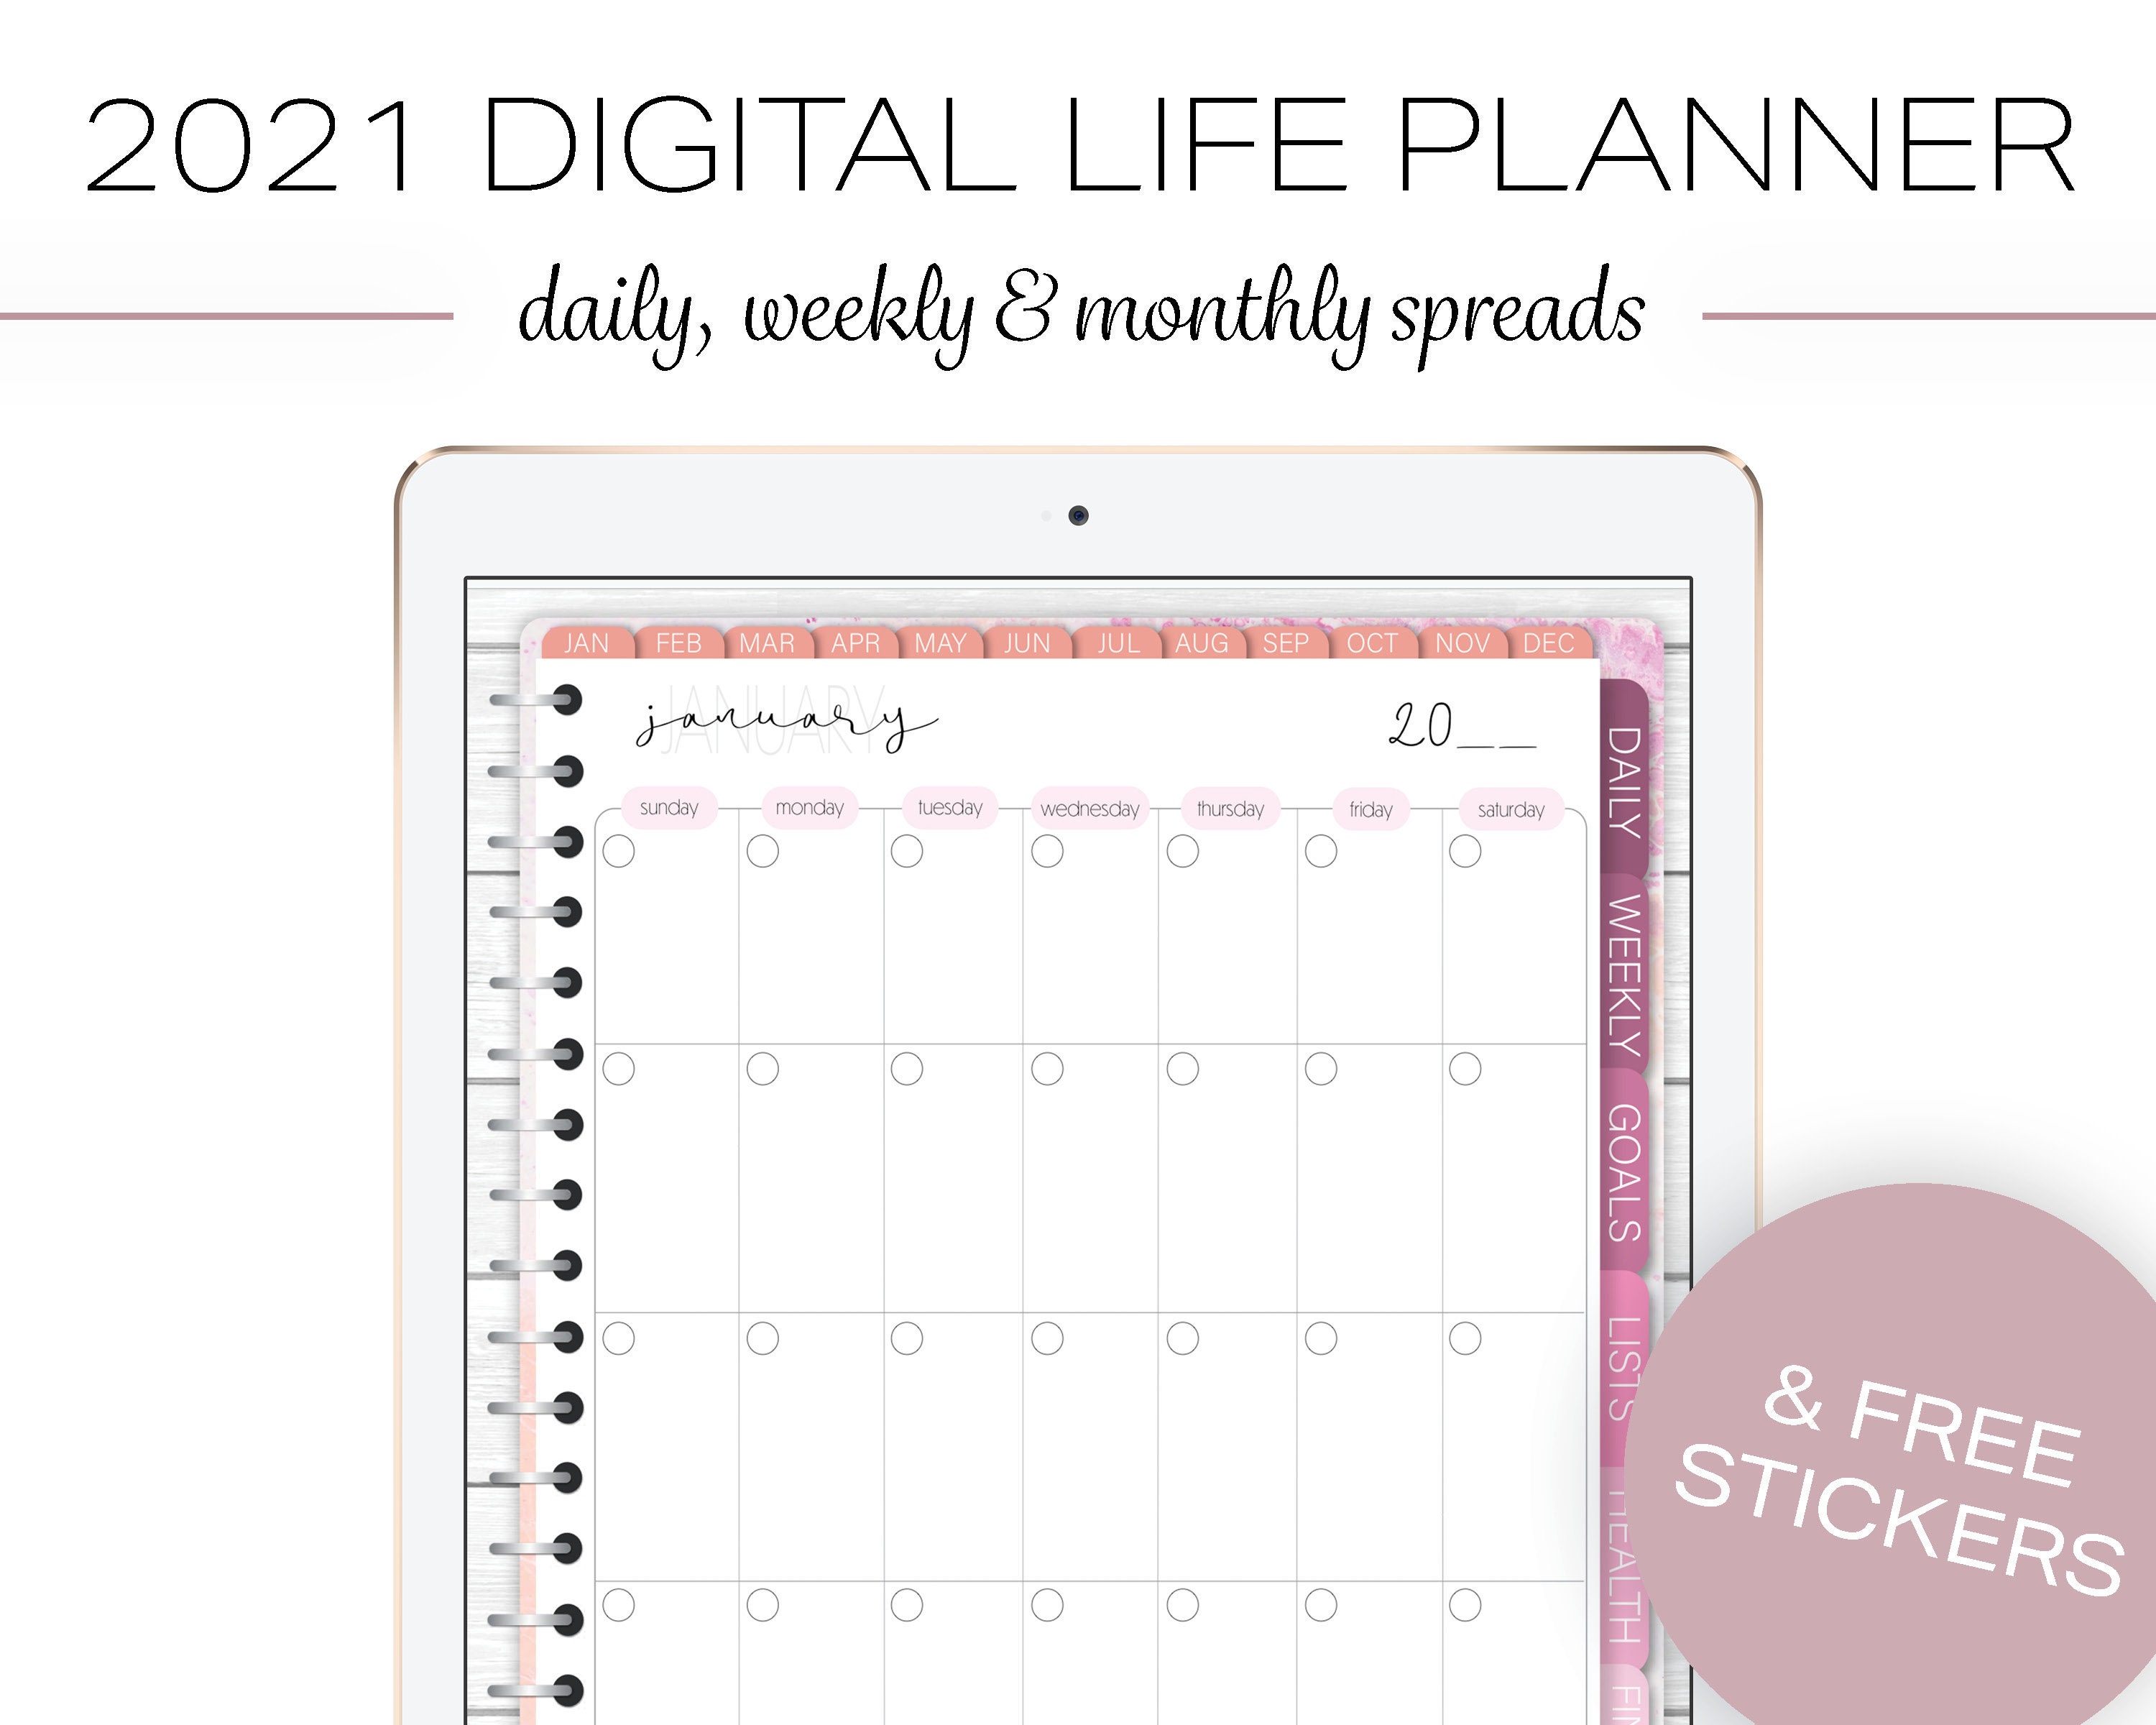 Digital Planner Goodnotes Planner iPad or Android Weekly Notability Hourly Daily iPad Planner Printable 2021 Digital Life Planner